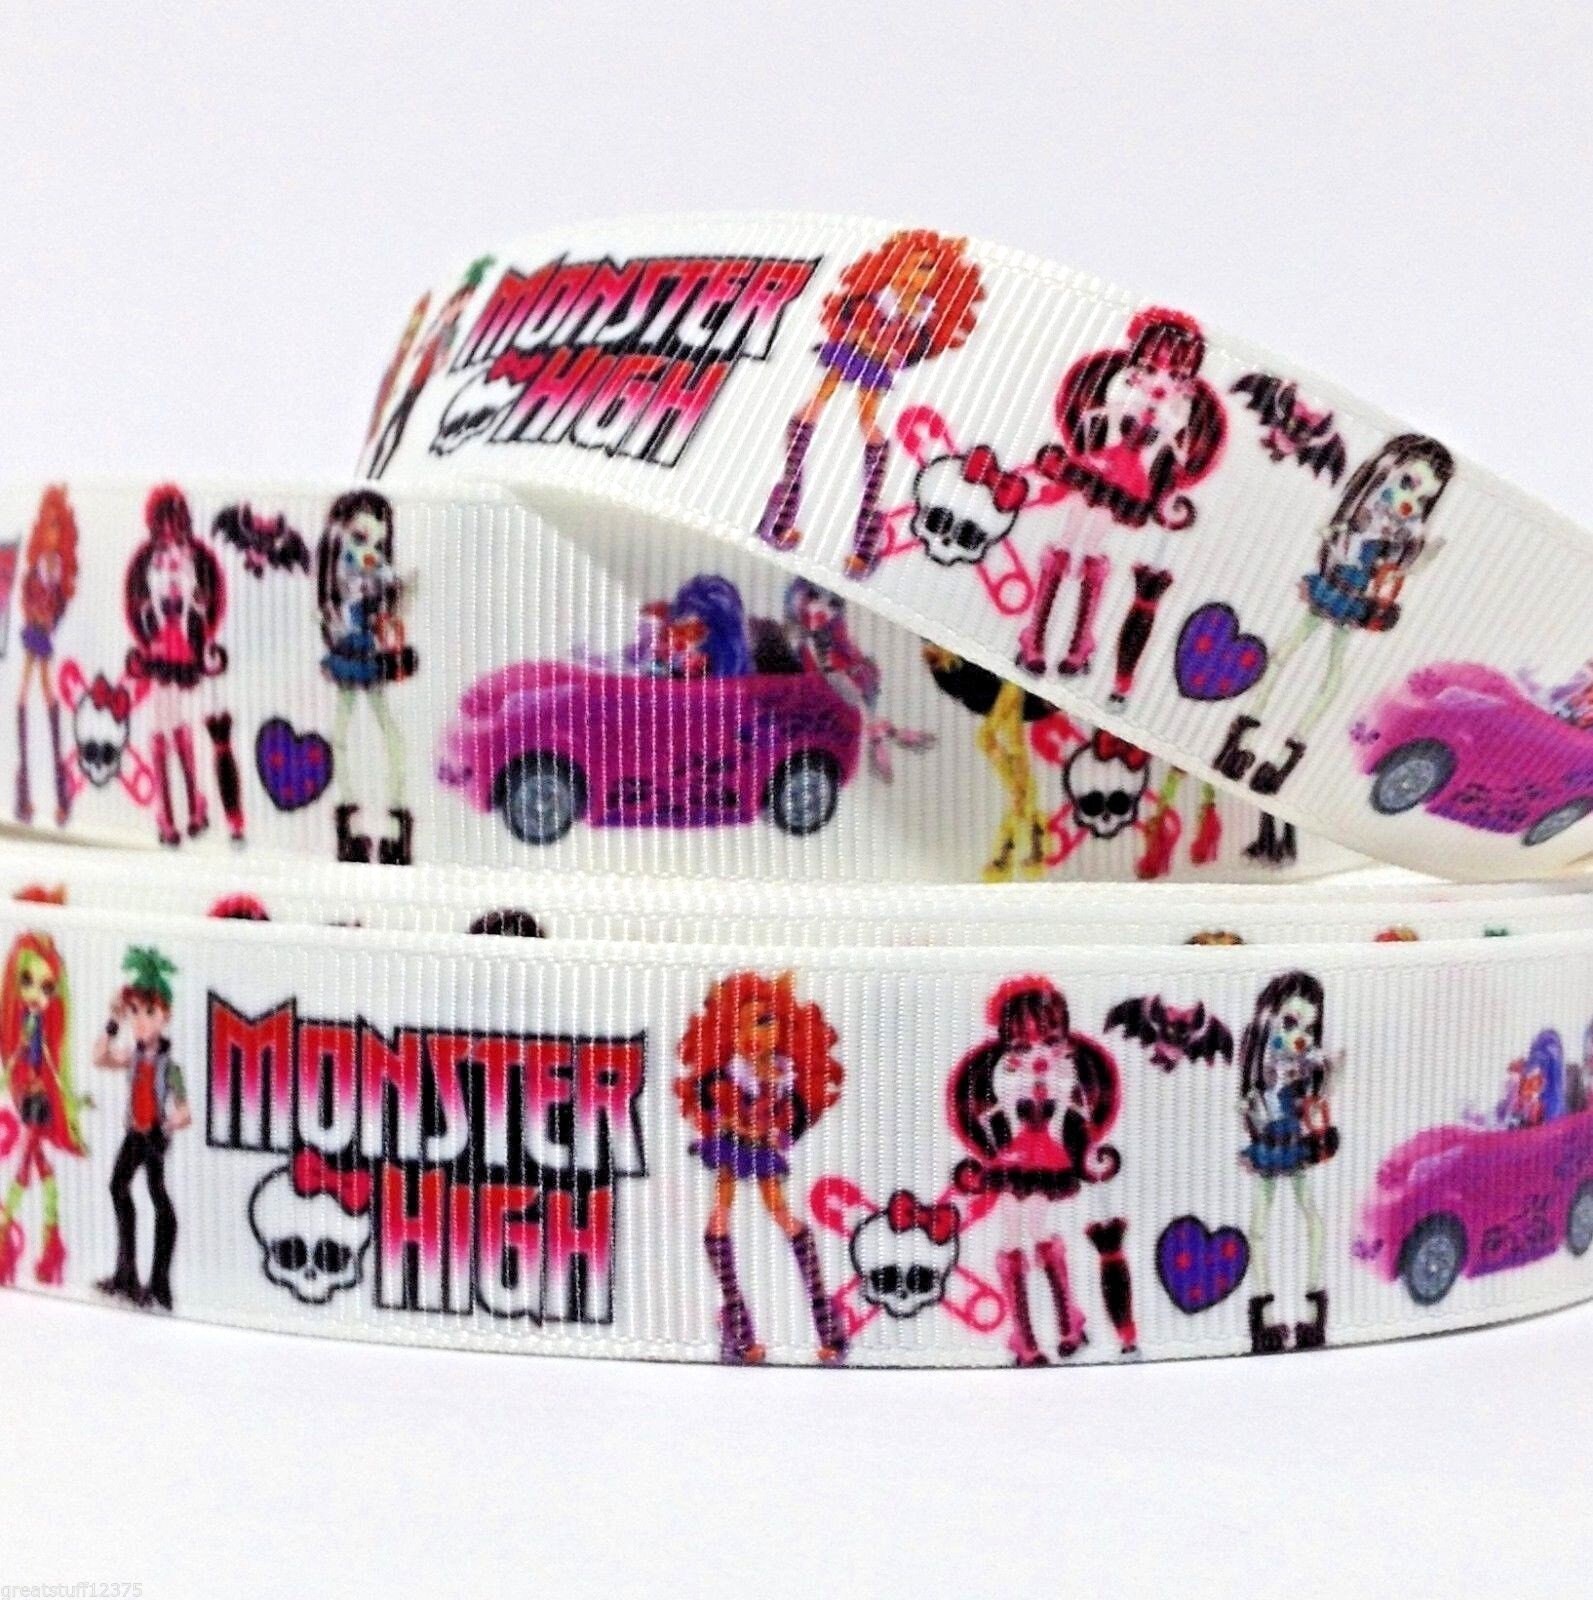 wide 1 2 5m Lengths Beauty and the Beast Printed Grosgrain Ribbon 22mm 7/8" 